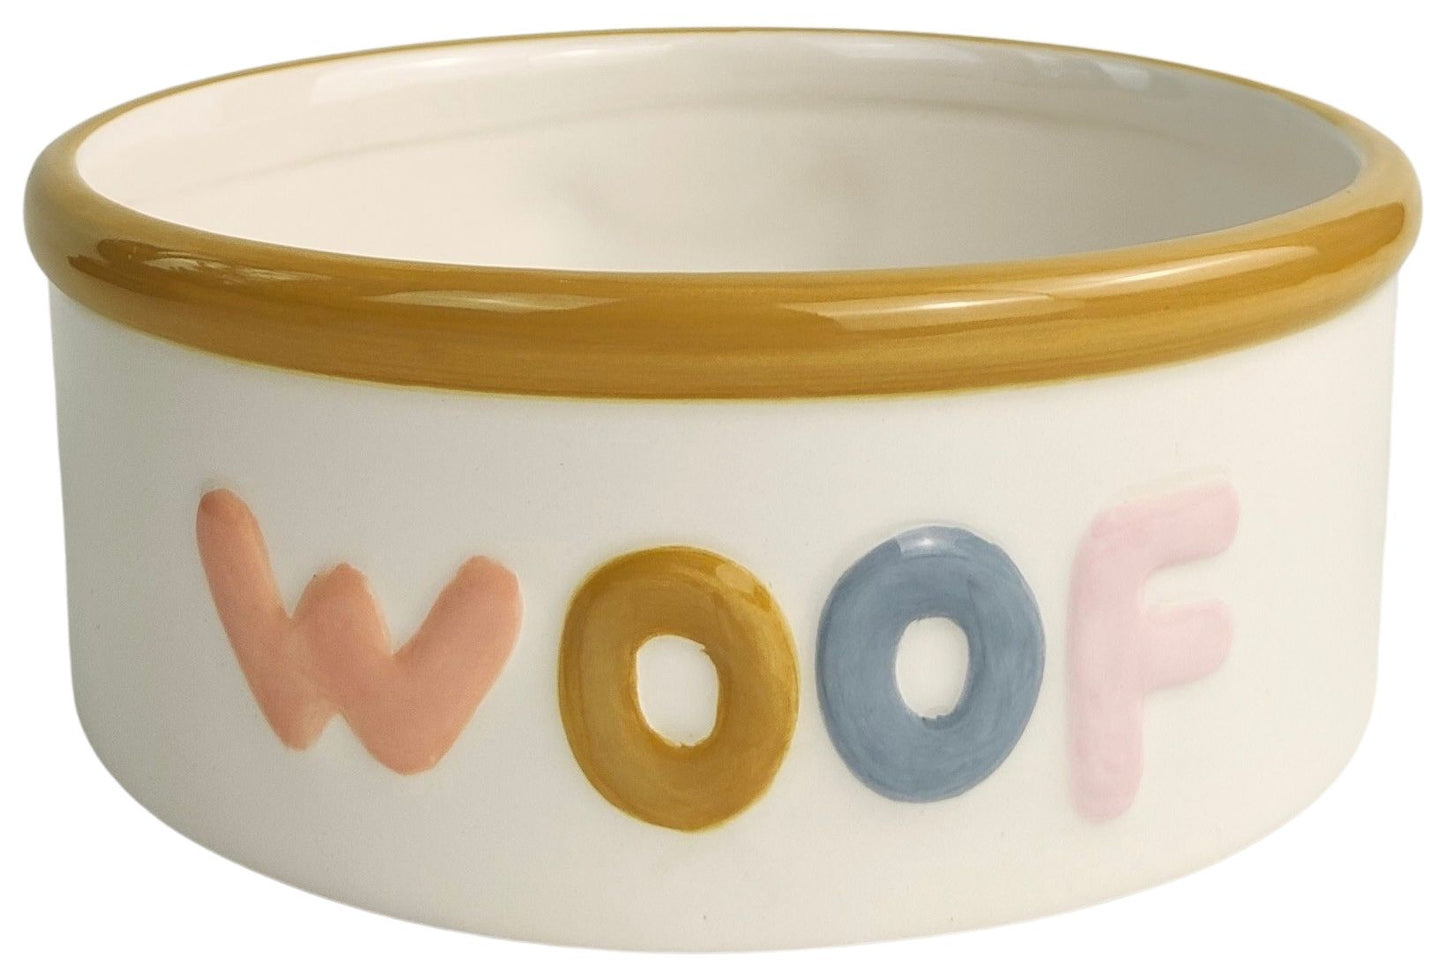 Urban Products Woof Dog Bowl